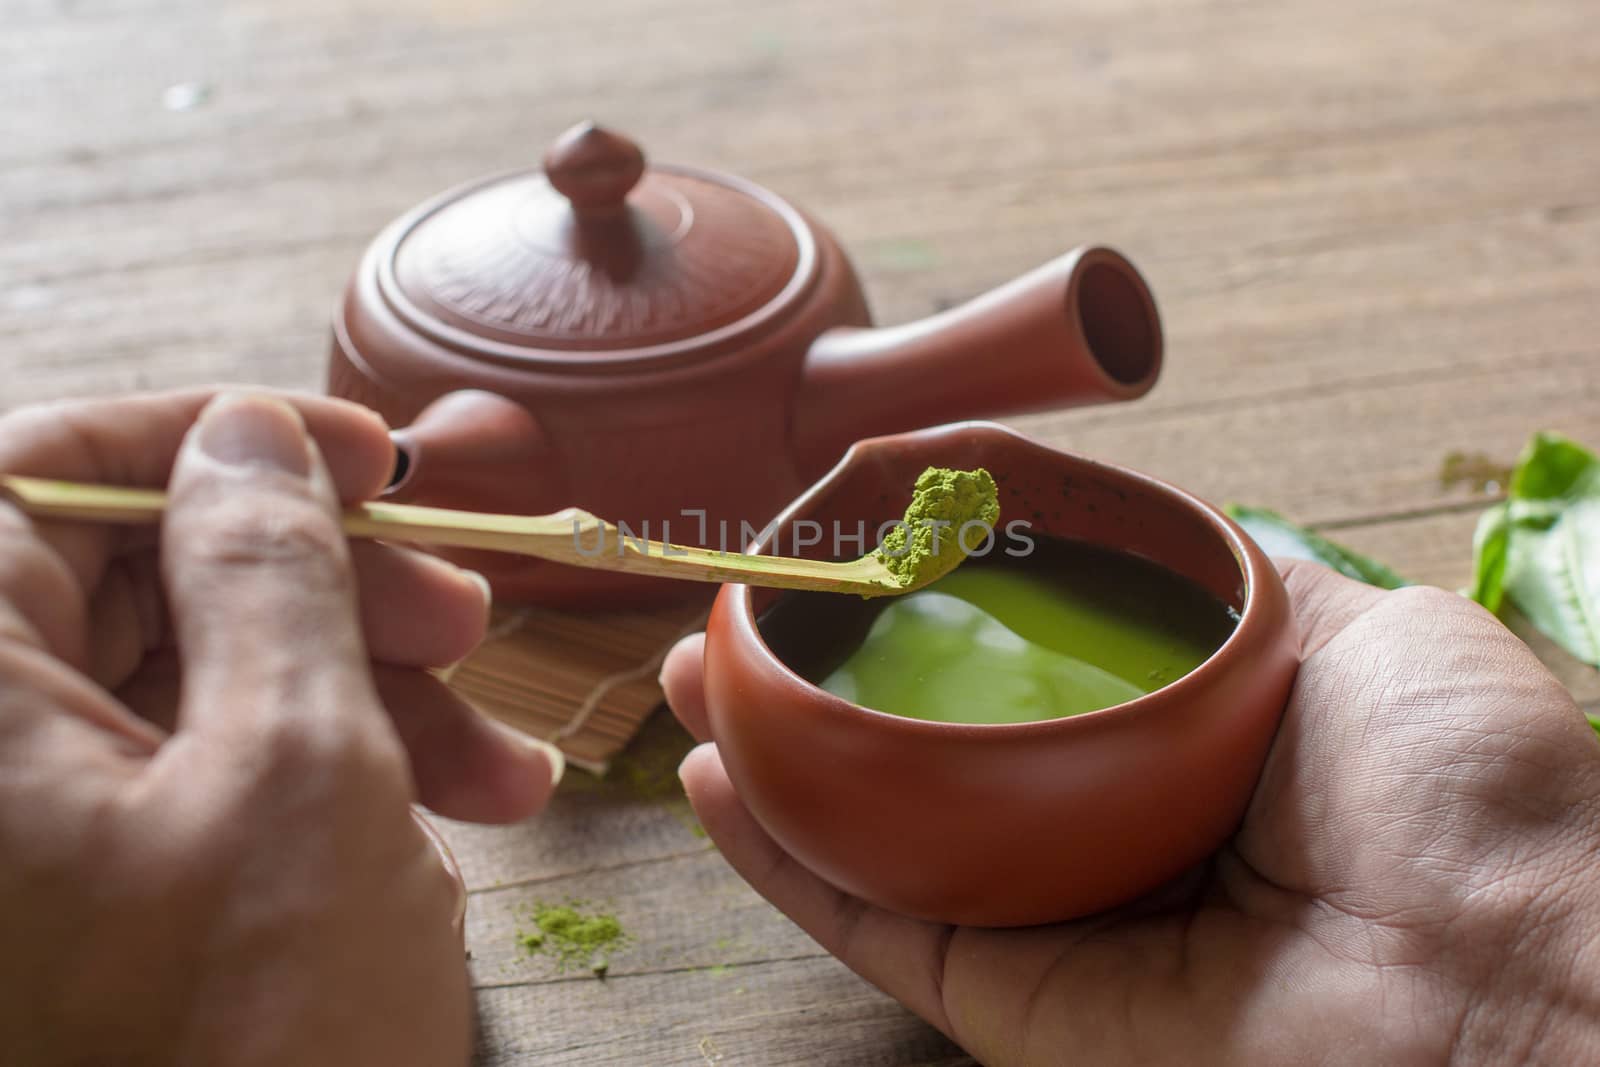 Matcha Green Tea and Japanese tea set. Ceramic teapot and a steaming cup on wooden background.